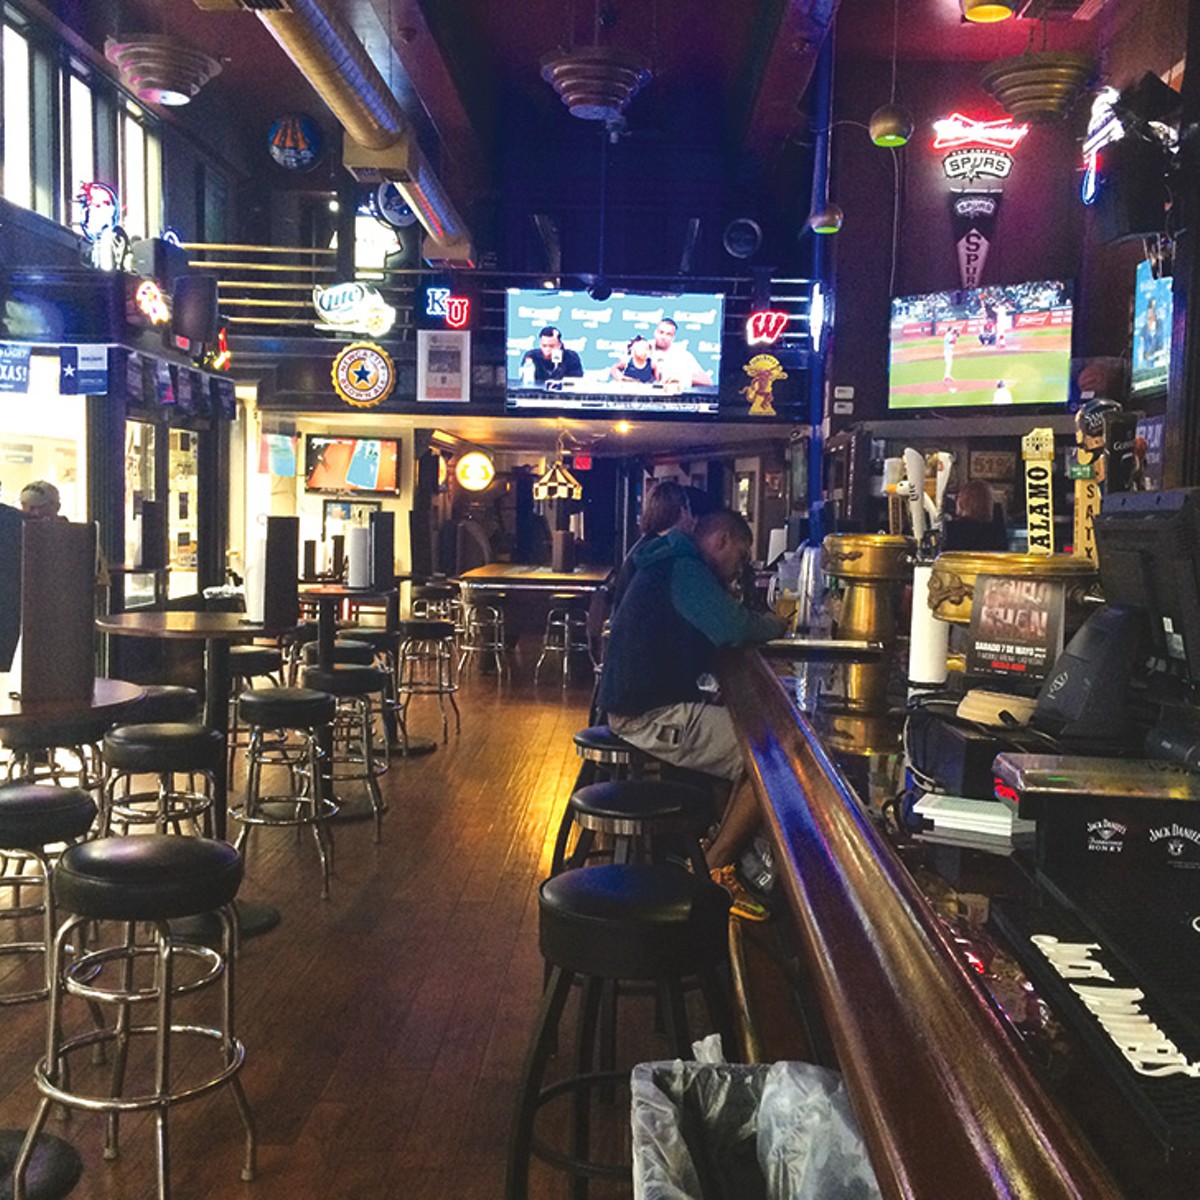 Spurs or Not, Ticket Sports Pub Caters to Locals and Tourists Alike